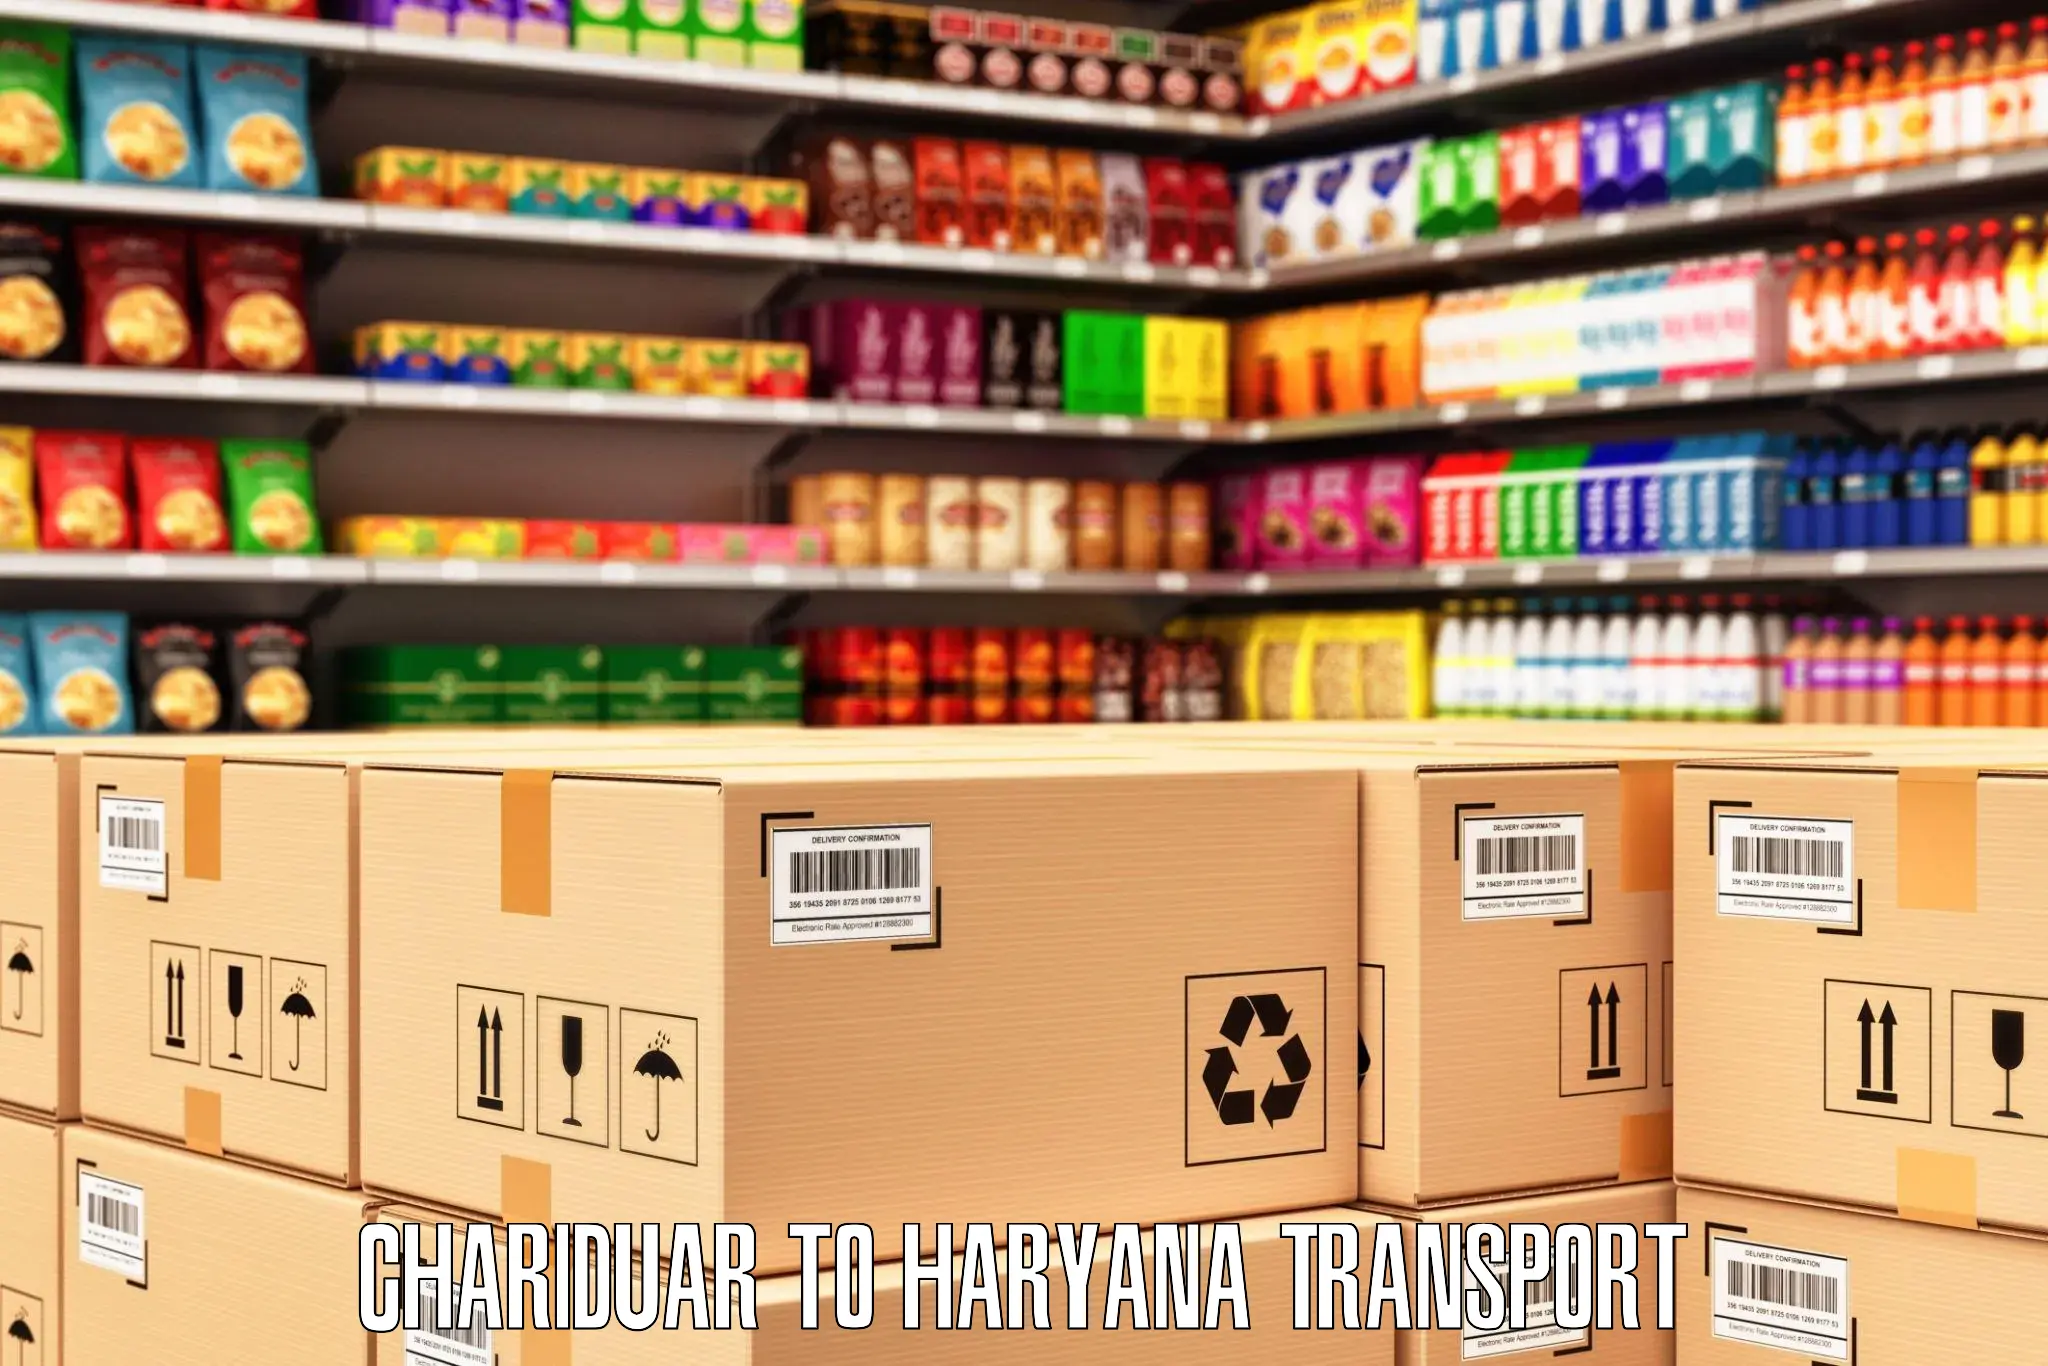 Commercial transport service Chariduar to Panipat